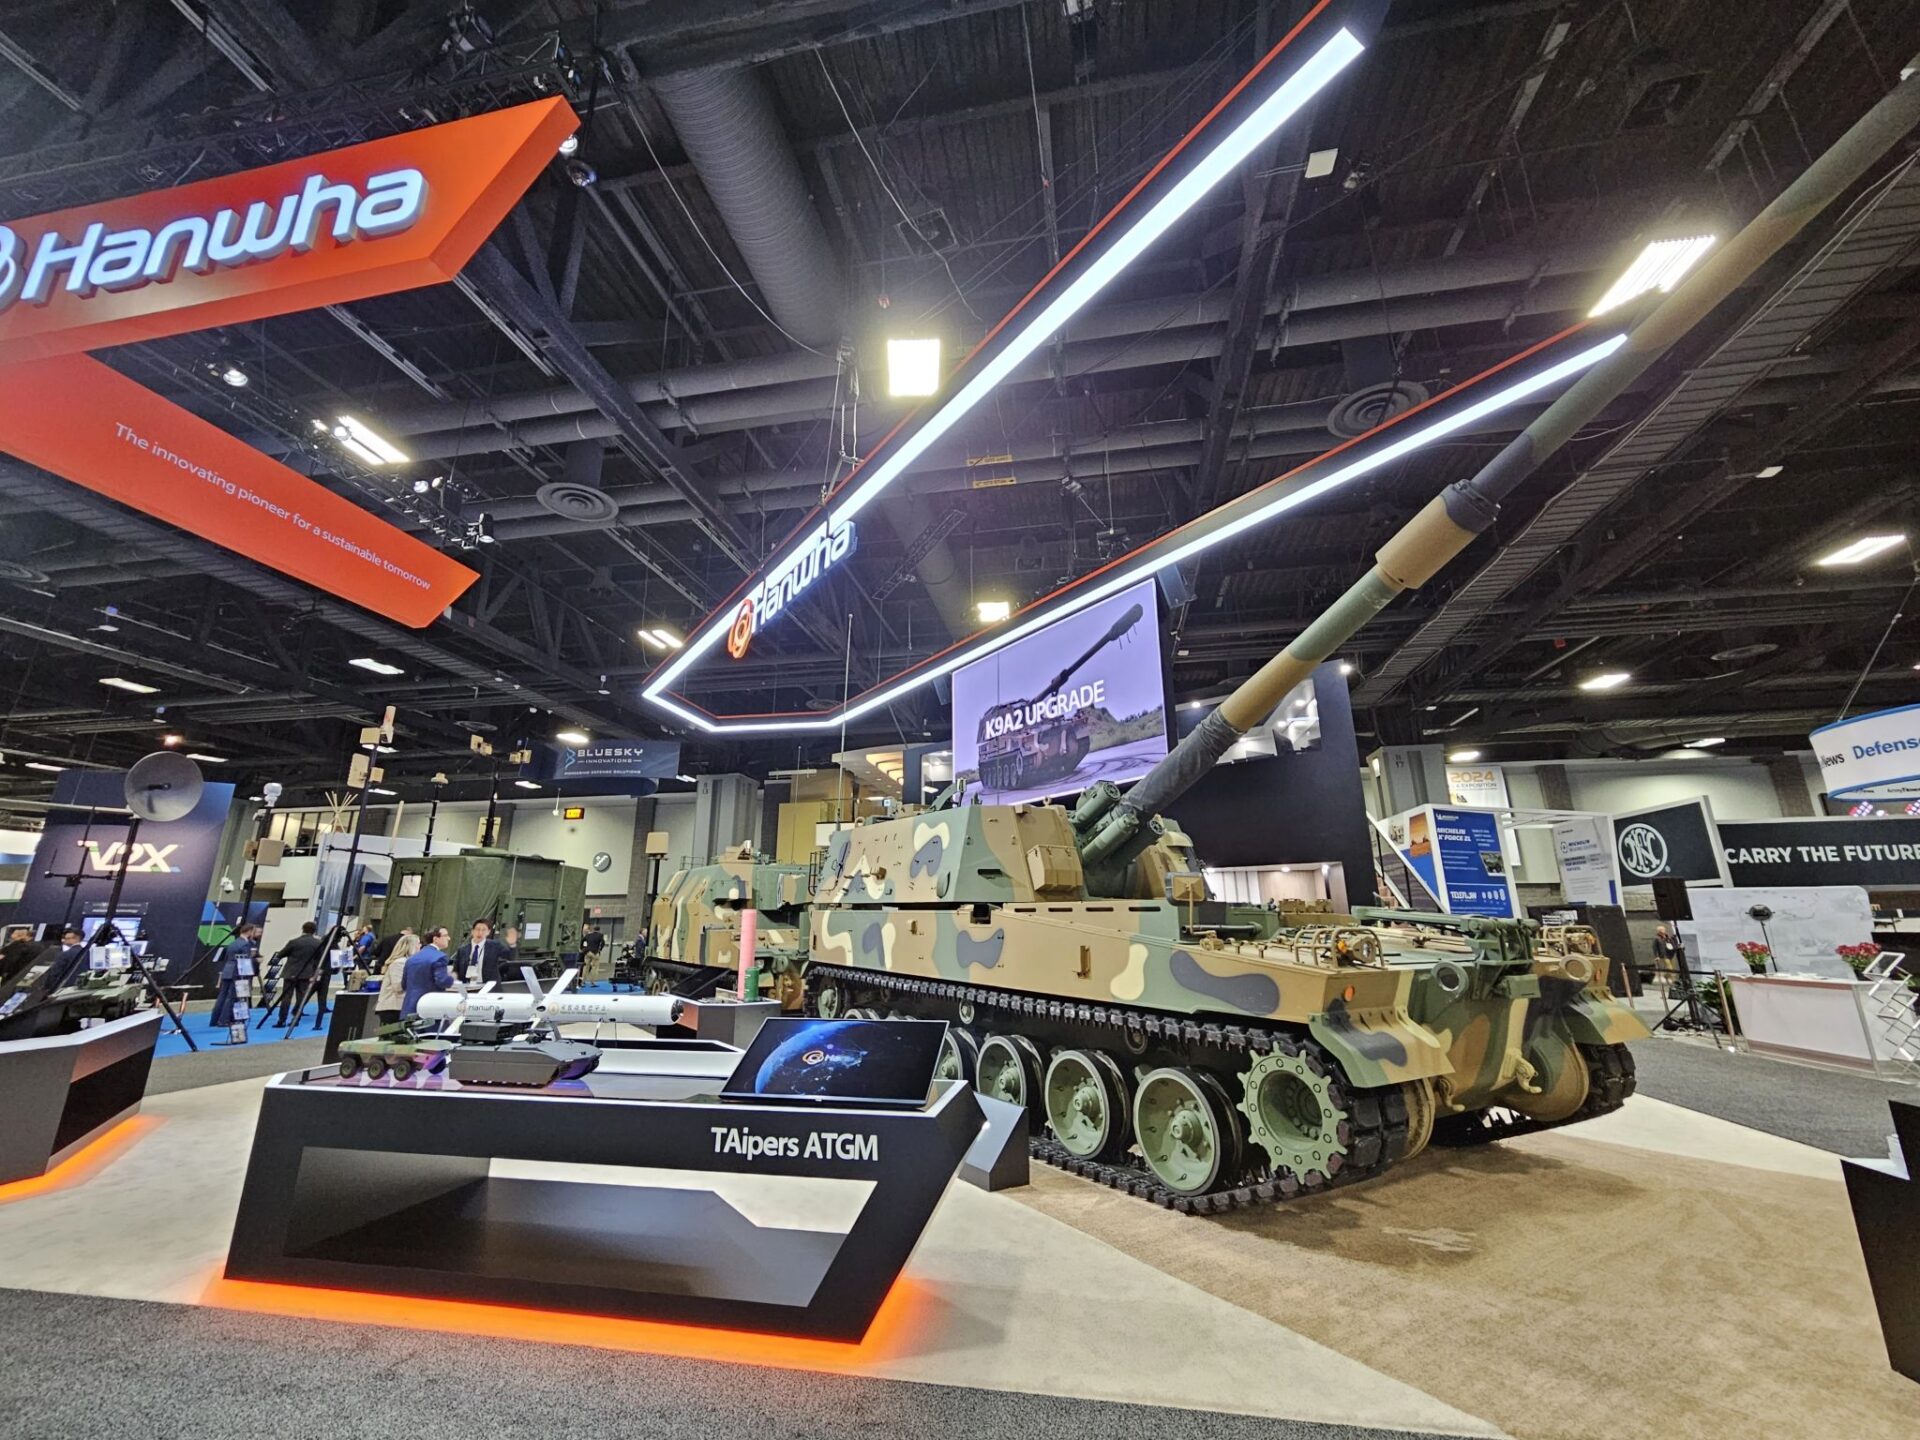 Hanwha showcases its latest products at AUSA show